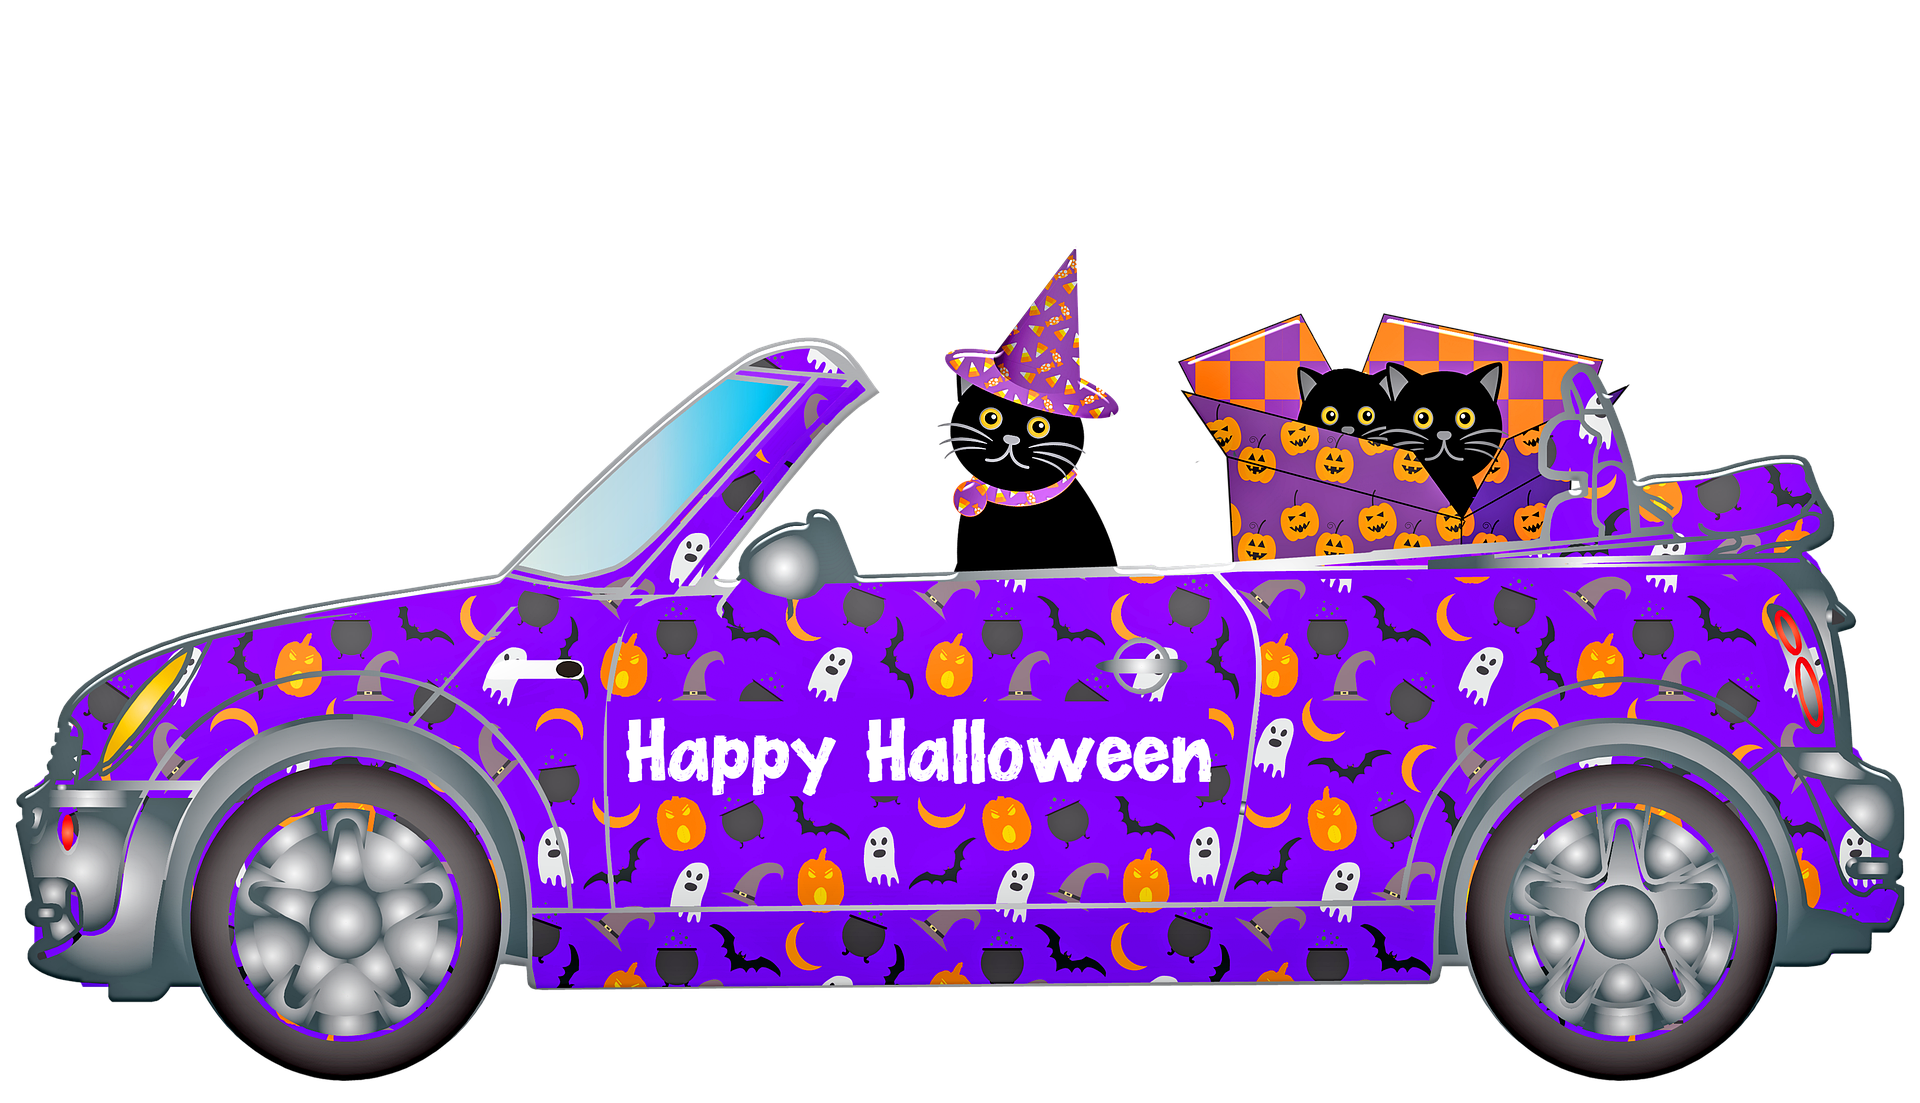 Image of a purple car decorated for Halloween with three cats riding in it.